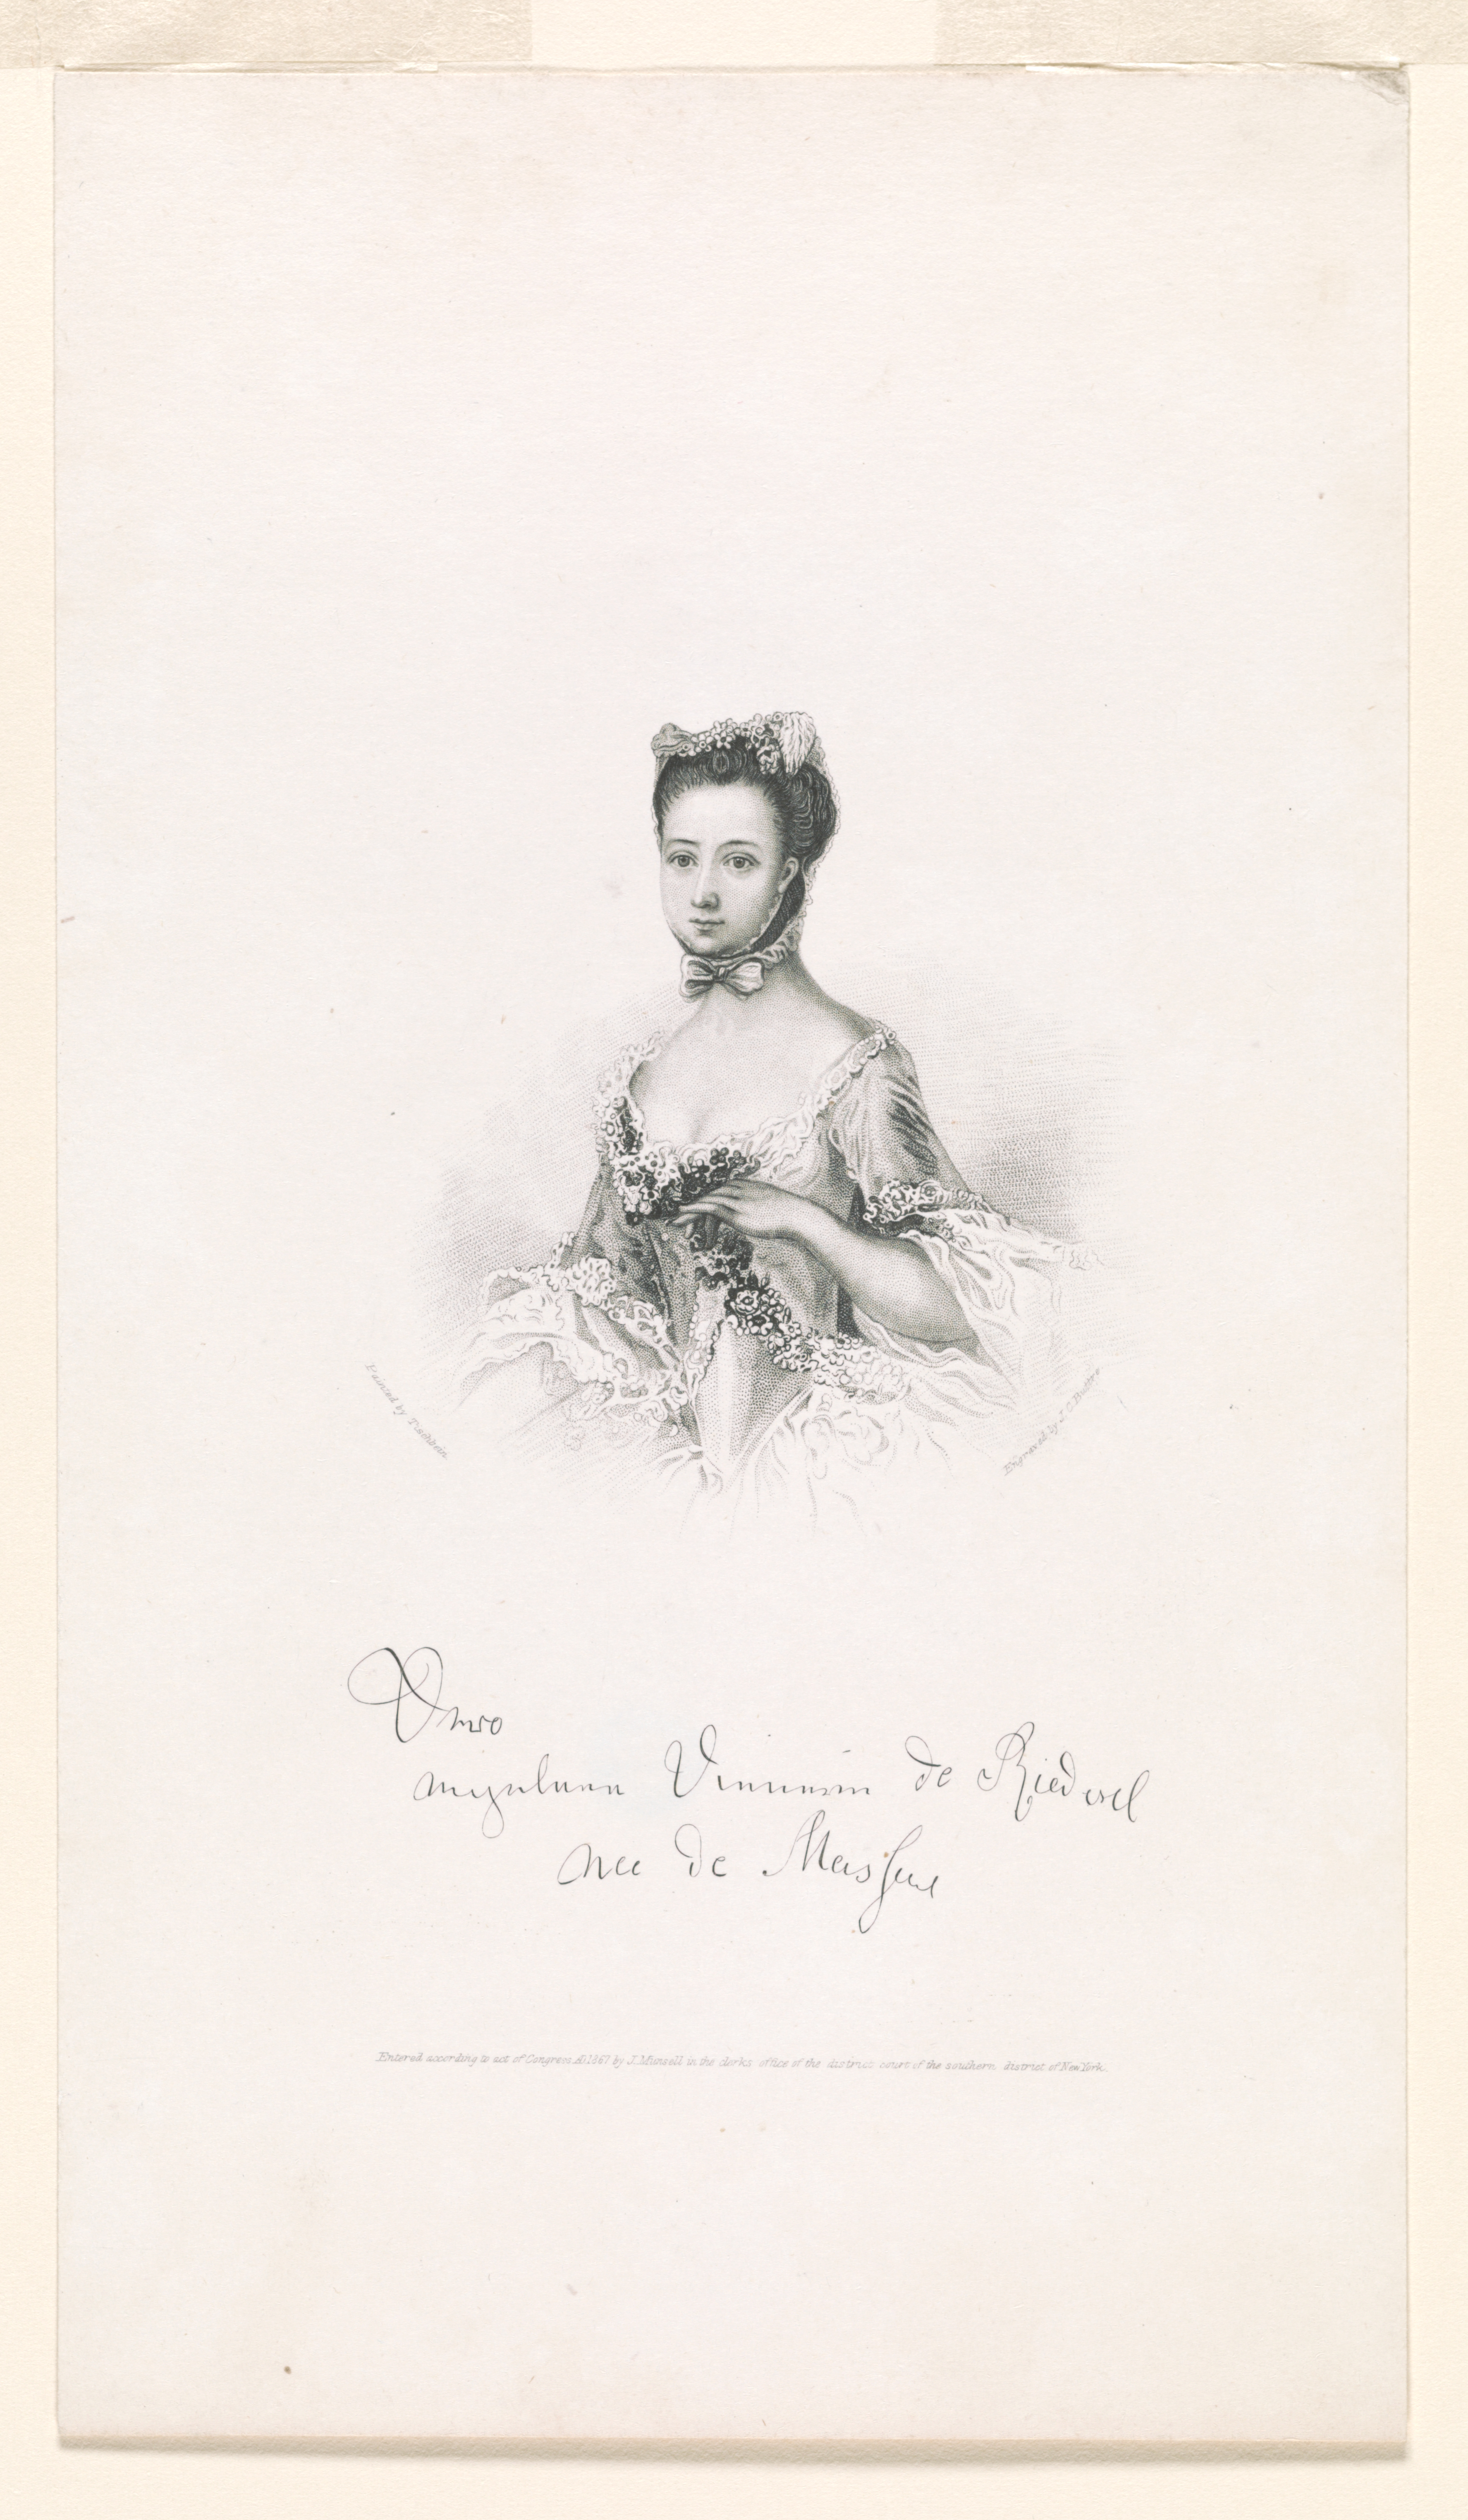 Drawing of Frederica Charlotte Luise Riedesel